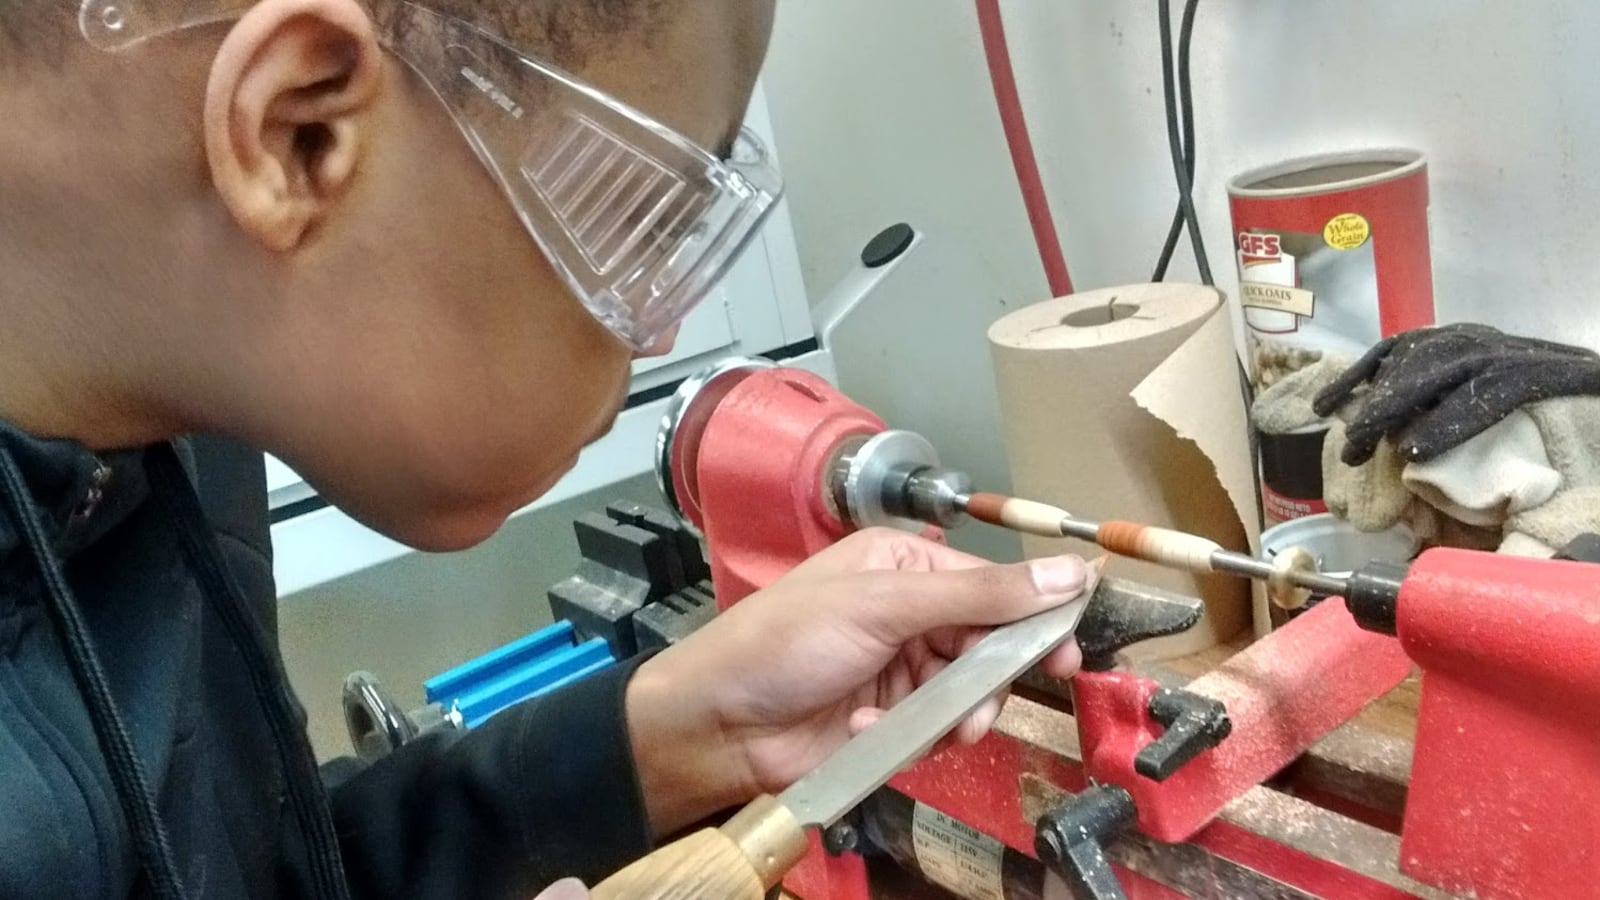 A student wearing goggles works on a piece of heavy machinery.